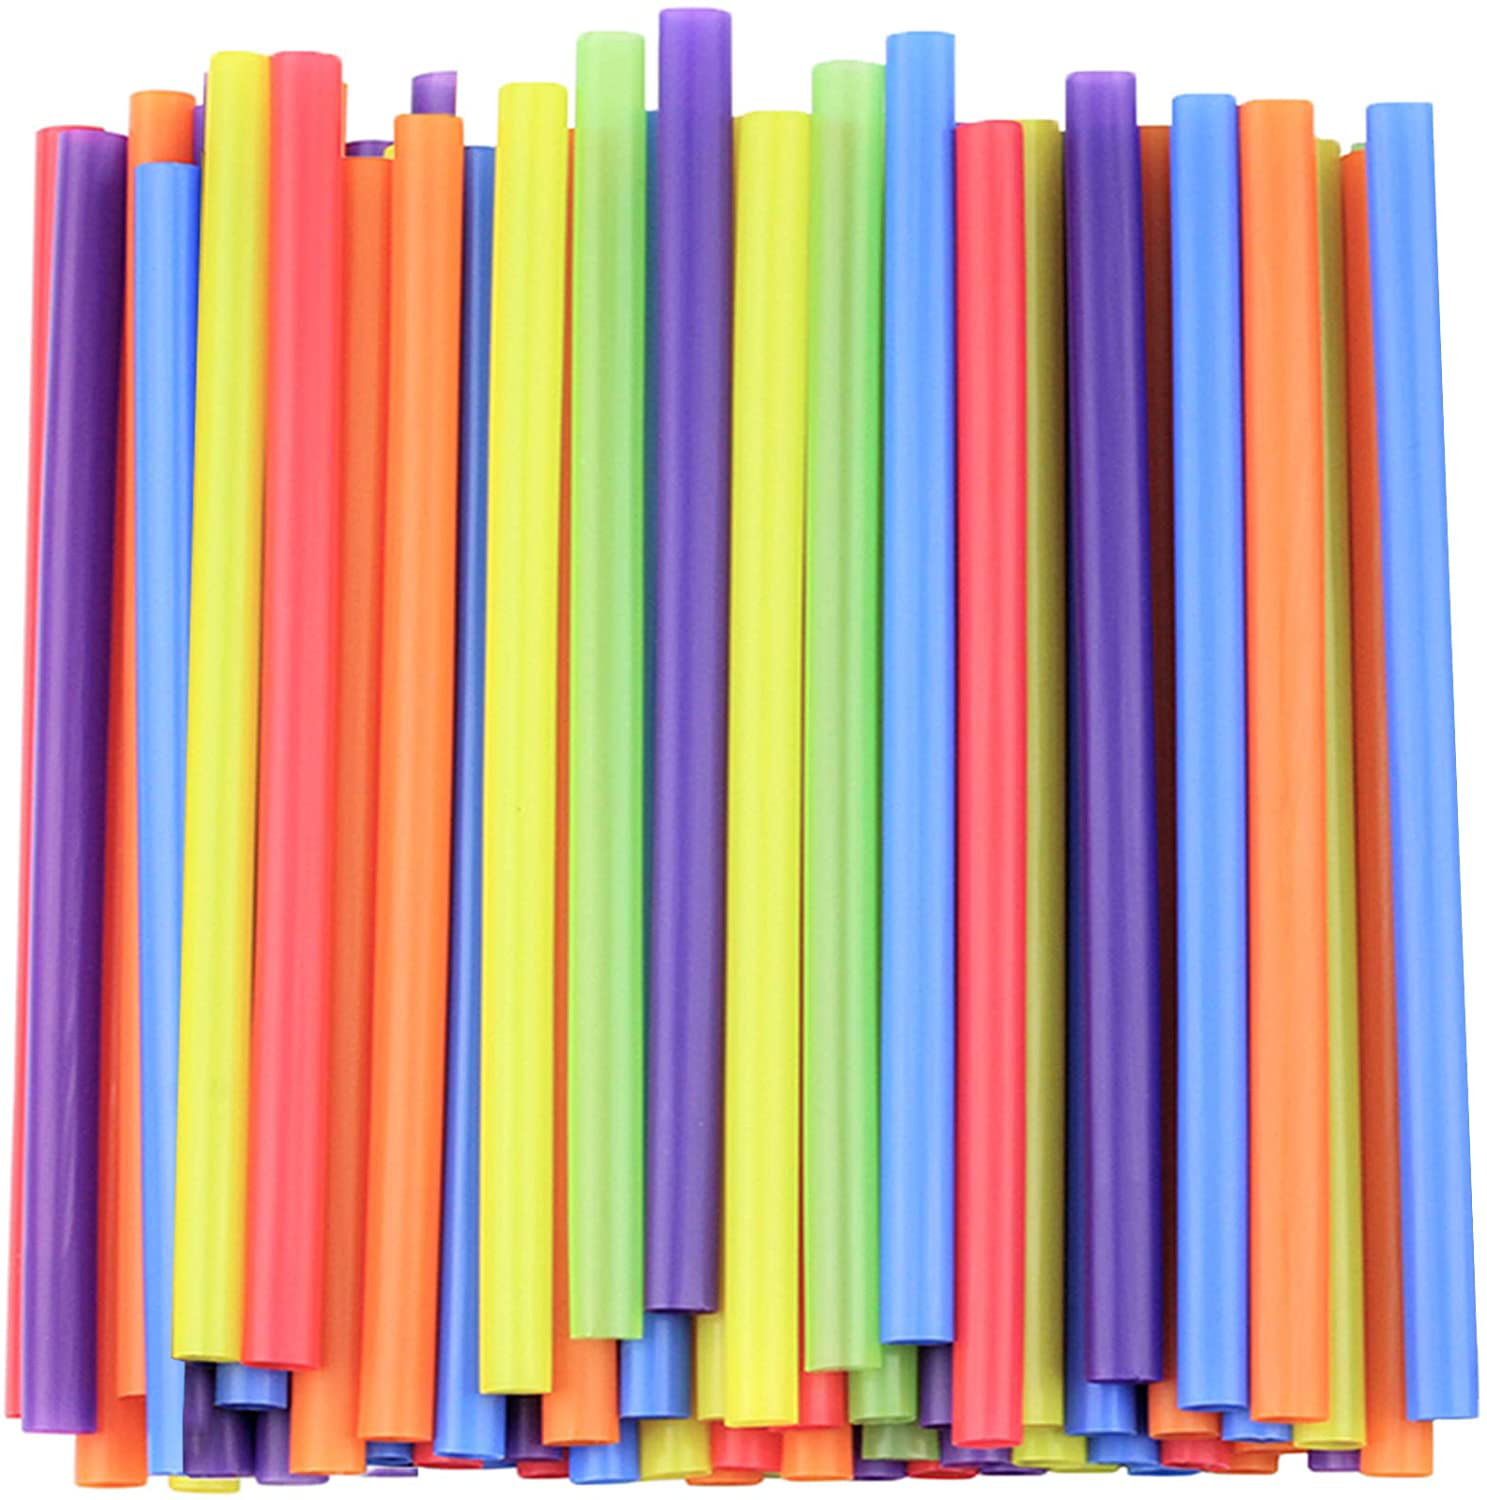 Large Wide Milkshake Disposable Plastic Drinking Straw 0.43 Diameter and 8.2 long CVNDKN 200 PCS Individually Packaged Colorful Jumbo Smoothie Straws 200 